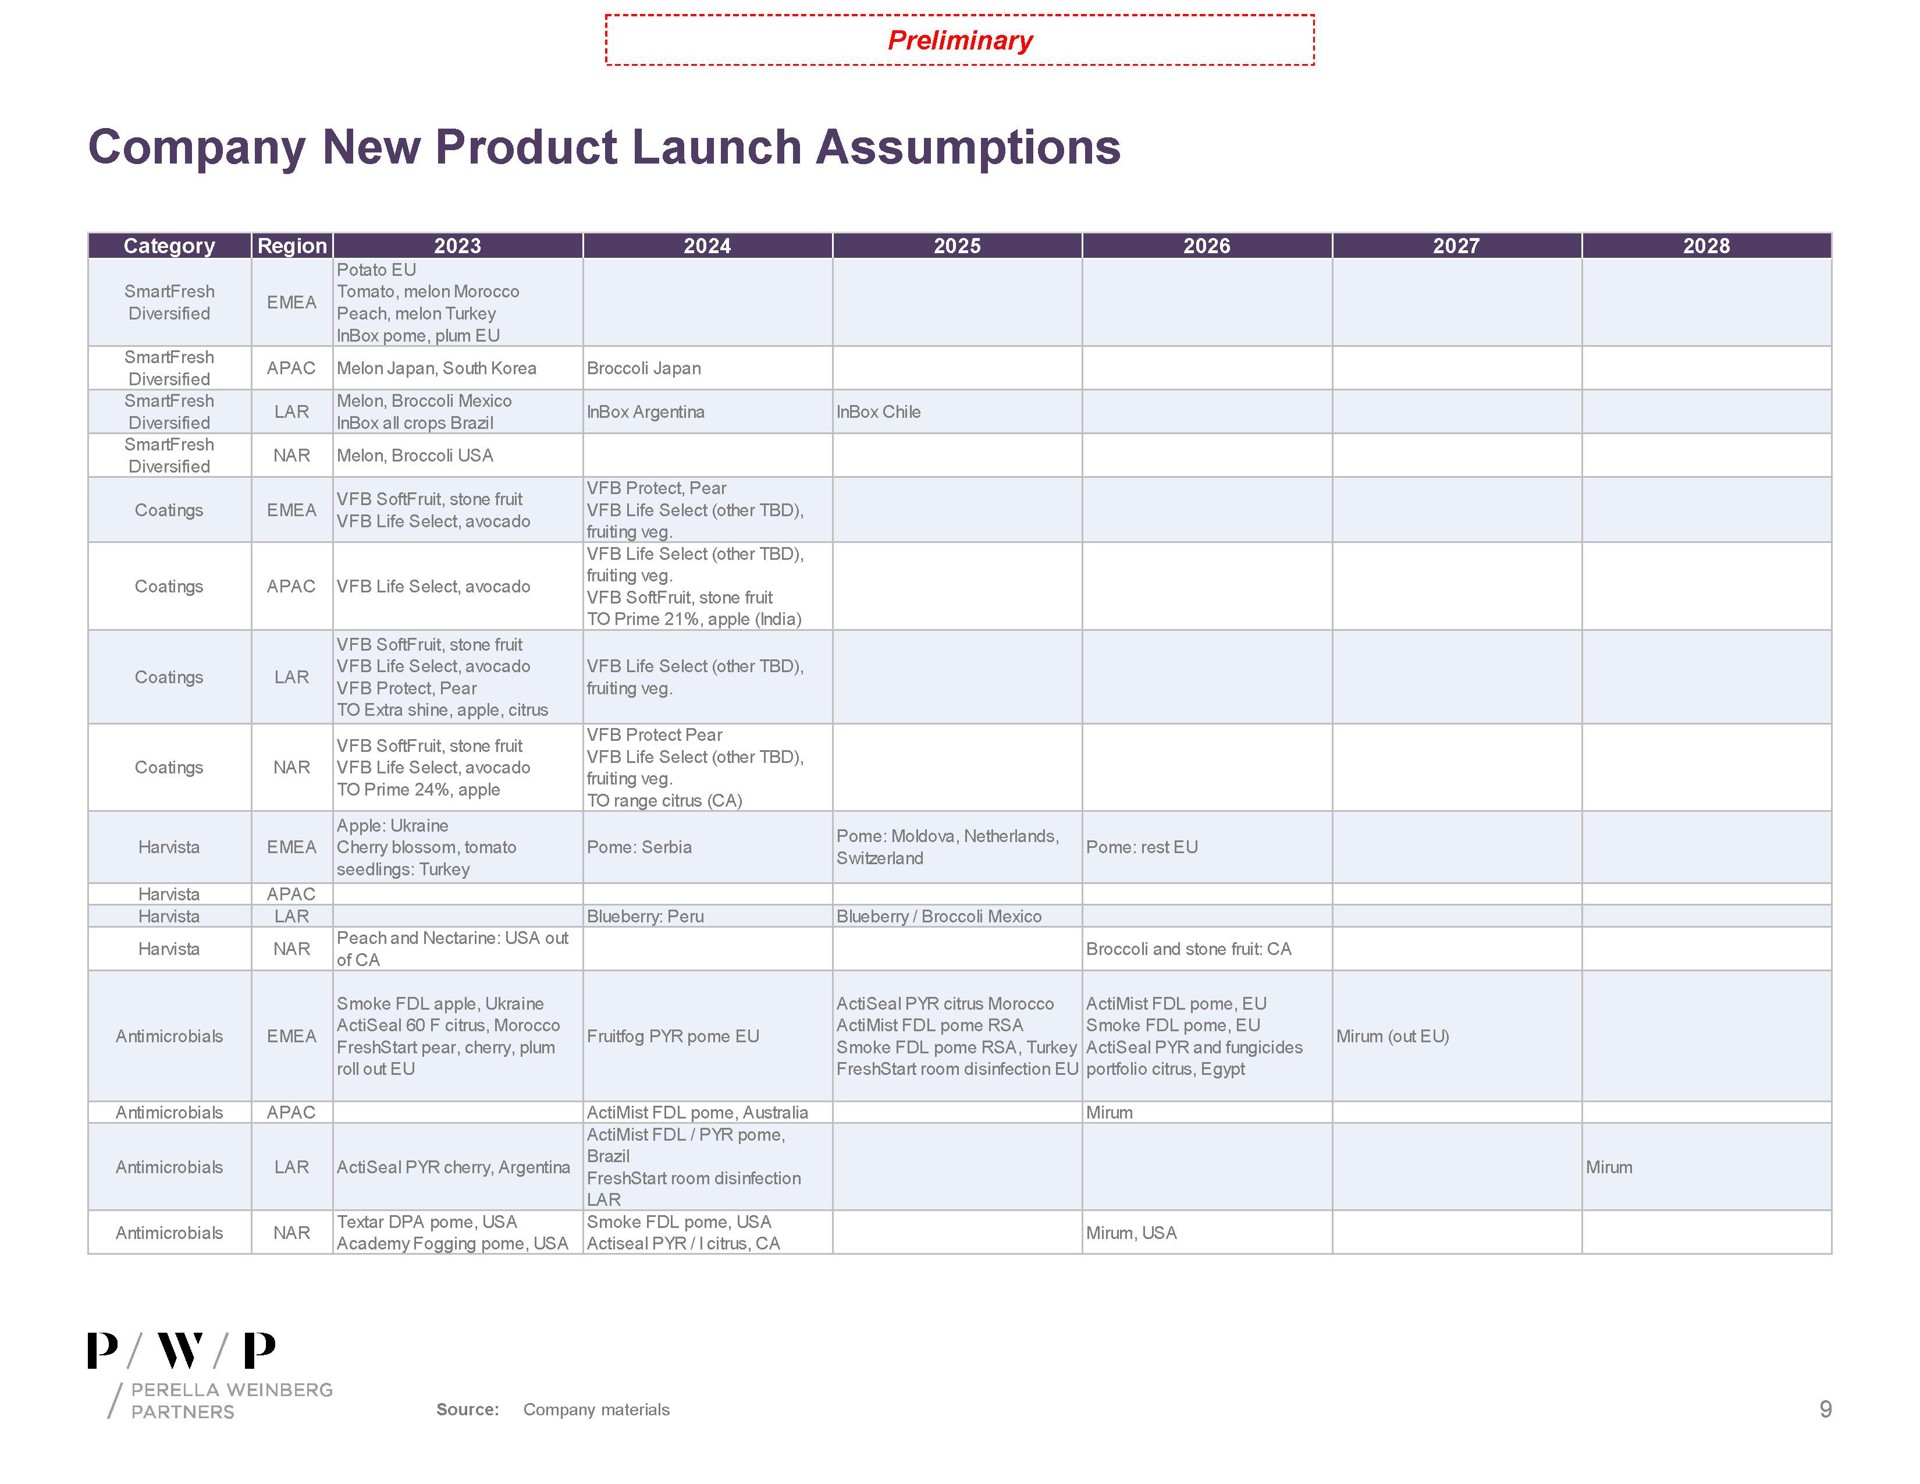 company new product launch assumptions | Perella Weinberg Partners